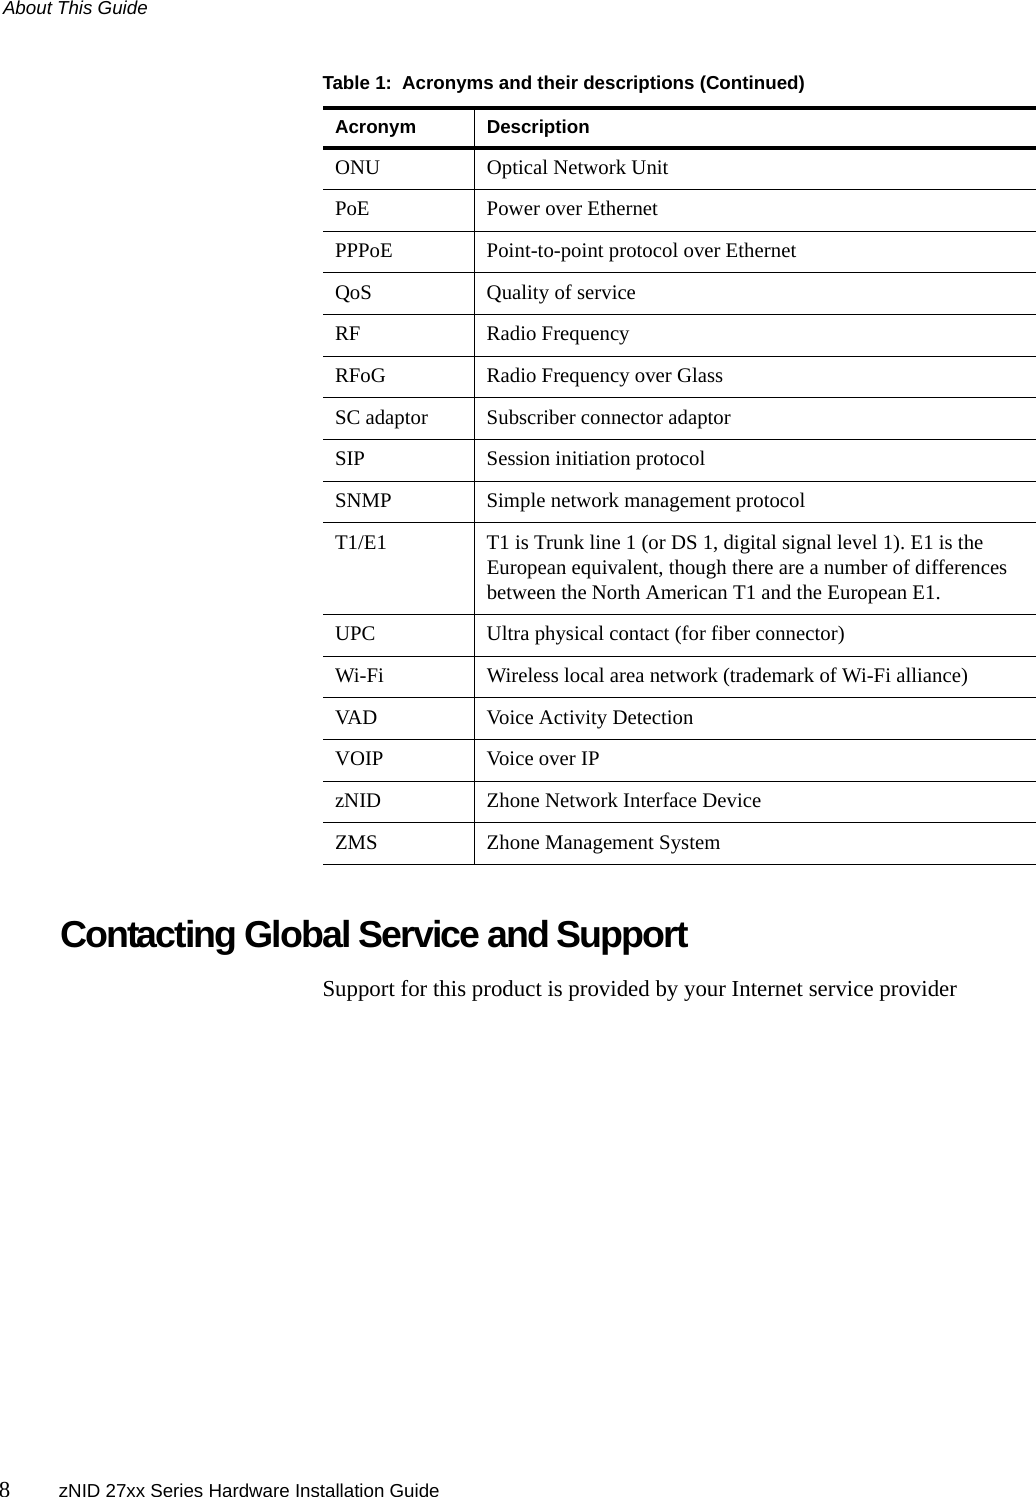 About This Guide8zNID 27xx Series Hardware Installation GuideContacting Global Service and SupportSupport for this product is provided by your Internet service providerONU Optical Network UnitPoE Power over EthernetPPPoE Point-to-point protocol over EthernetQoS Quality of serviceRF Radio FrequencyRFoG Radio Frequency over GlassSC adaptor Subscriber connector adaptorSIP Session initiation protocolSNMP Simple network management protocolT1/E1 T1 is Trunk line 1 (or DS 1, digital signal level 1). E1 is the European equivalent, though there are a number of differences between the North American T1 and the European E1.UPC Ultra physical contact (for fiber connector)Wi-Fi Wireless local area network (trademark of Wi-Fi alliance)VAD Voice Activity DetectionVOIP Voice over IPzNID Zhone Network Interface DeviceZMS Zhone Management SystemTable 1:  Acronyms and their descriptions (Continued)Acronym Description